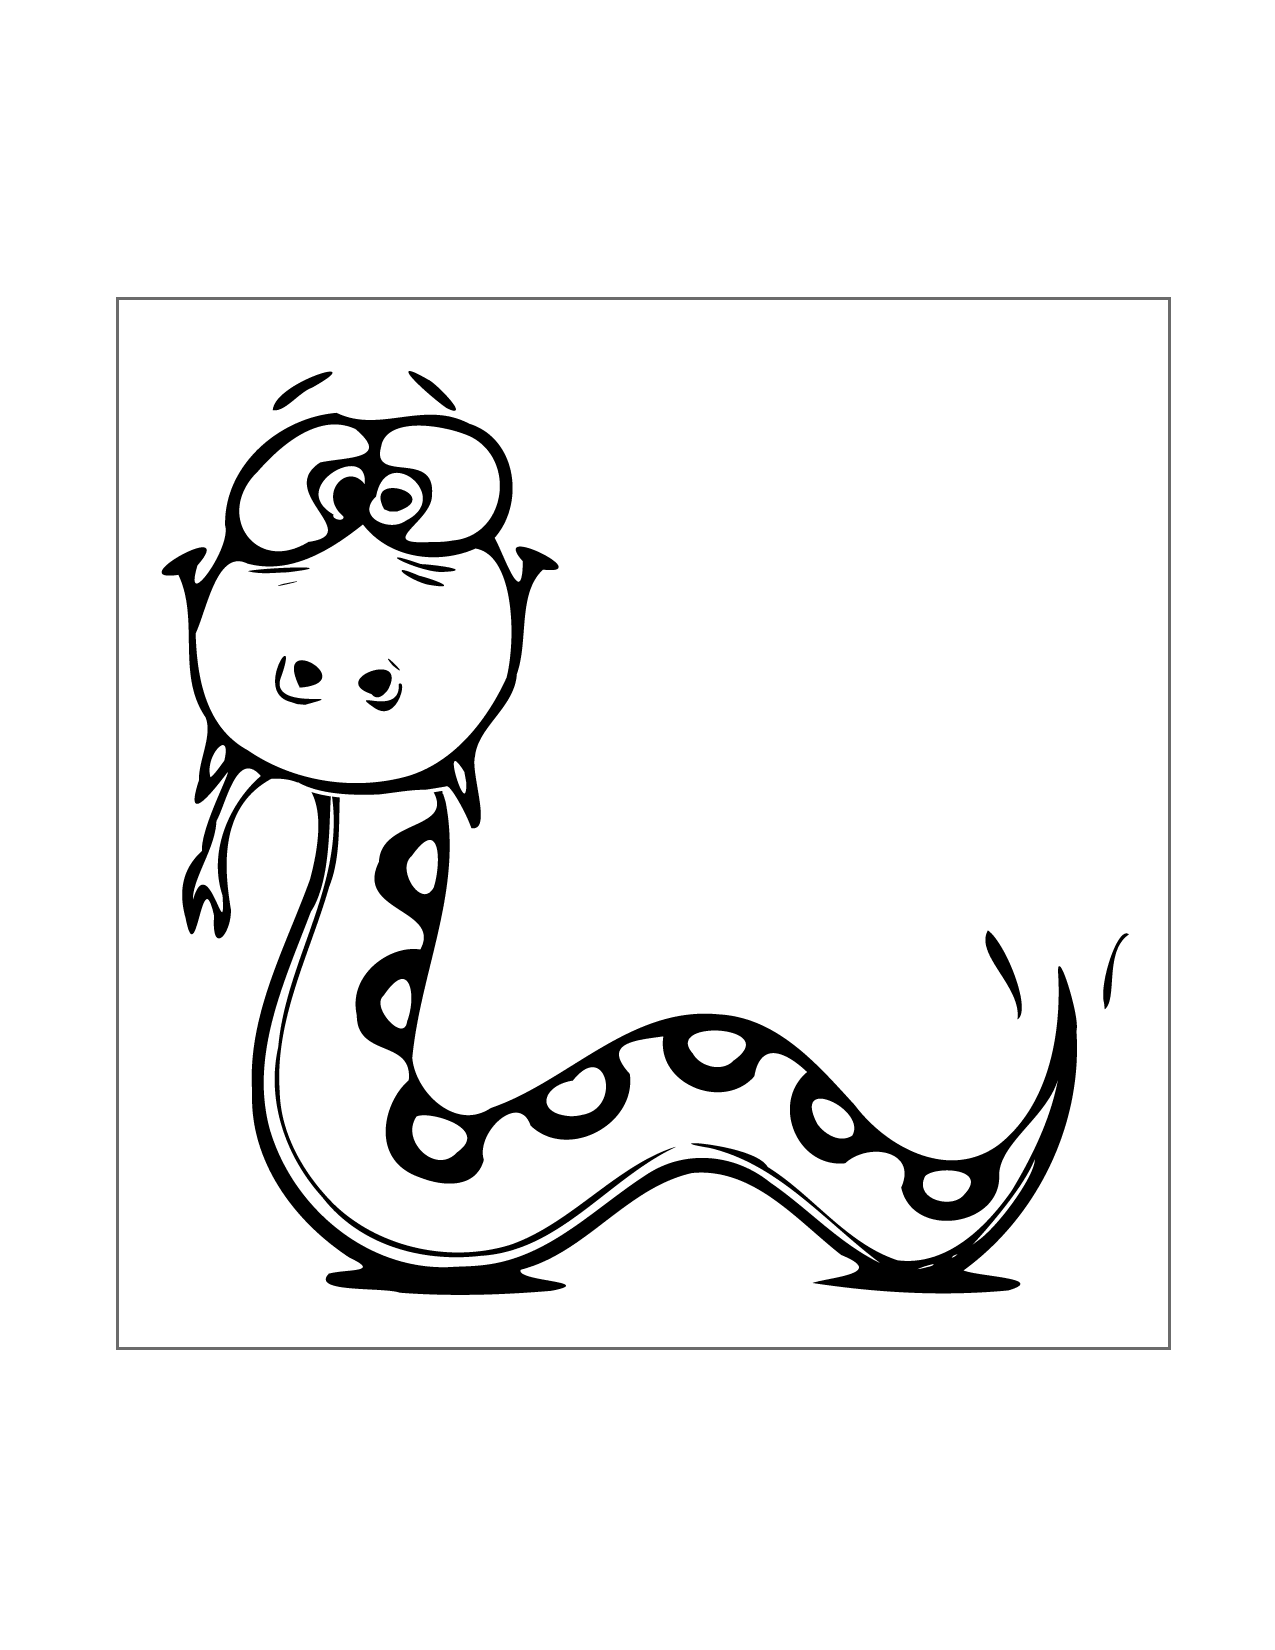 Cute Snake Coloring Page